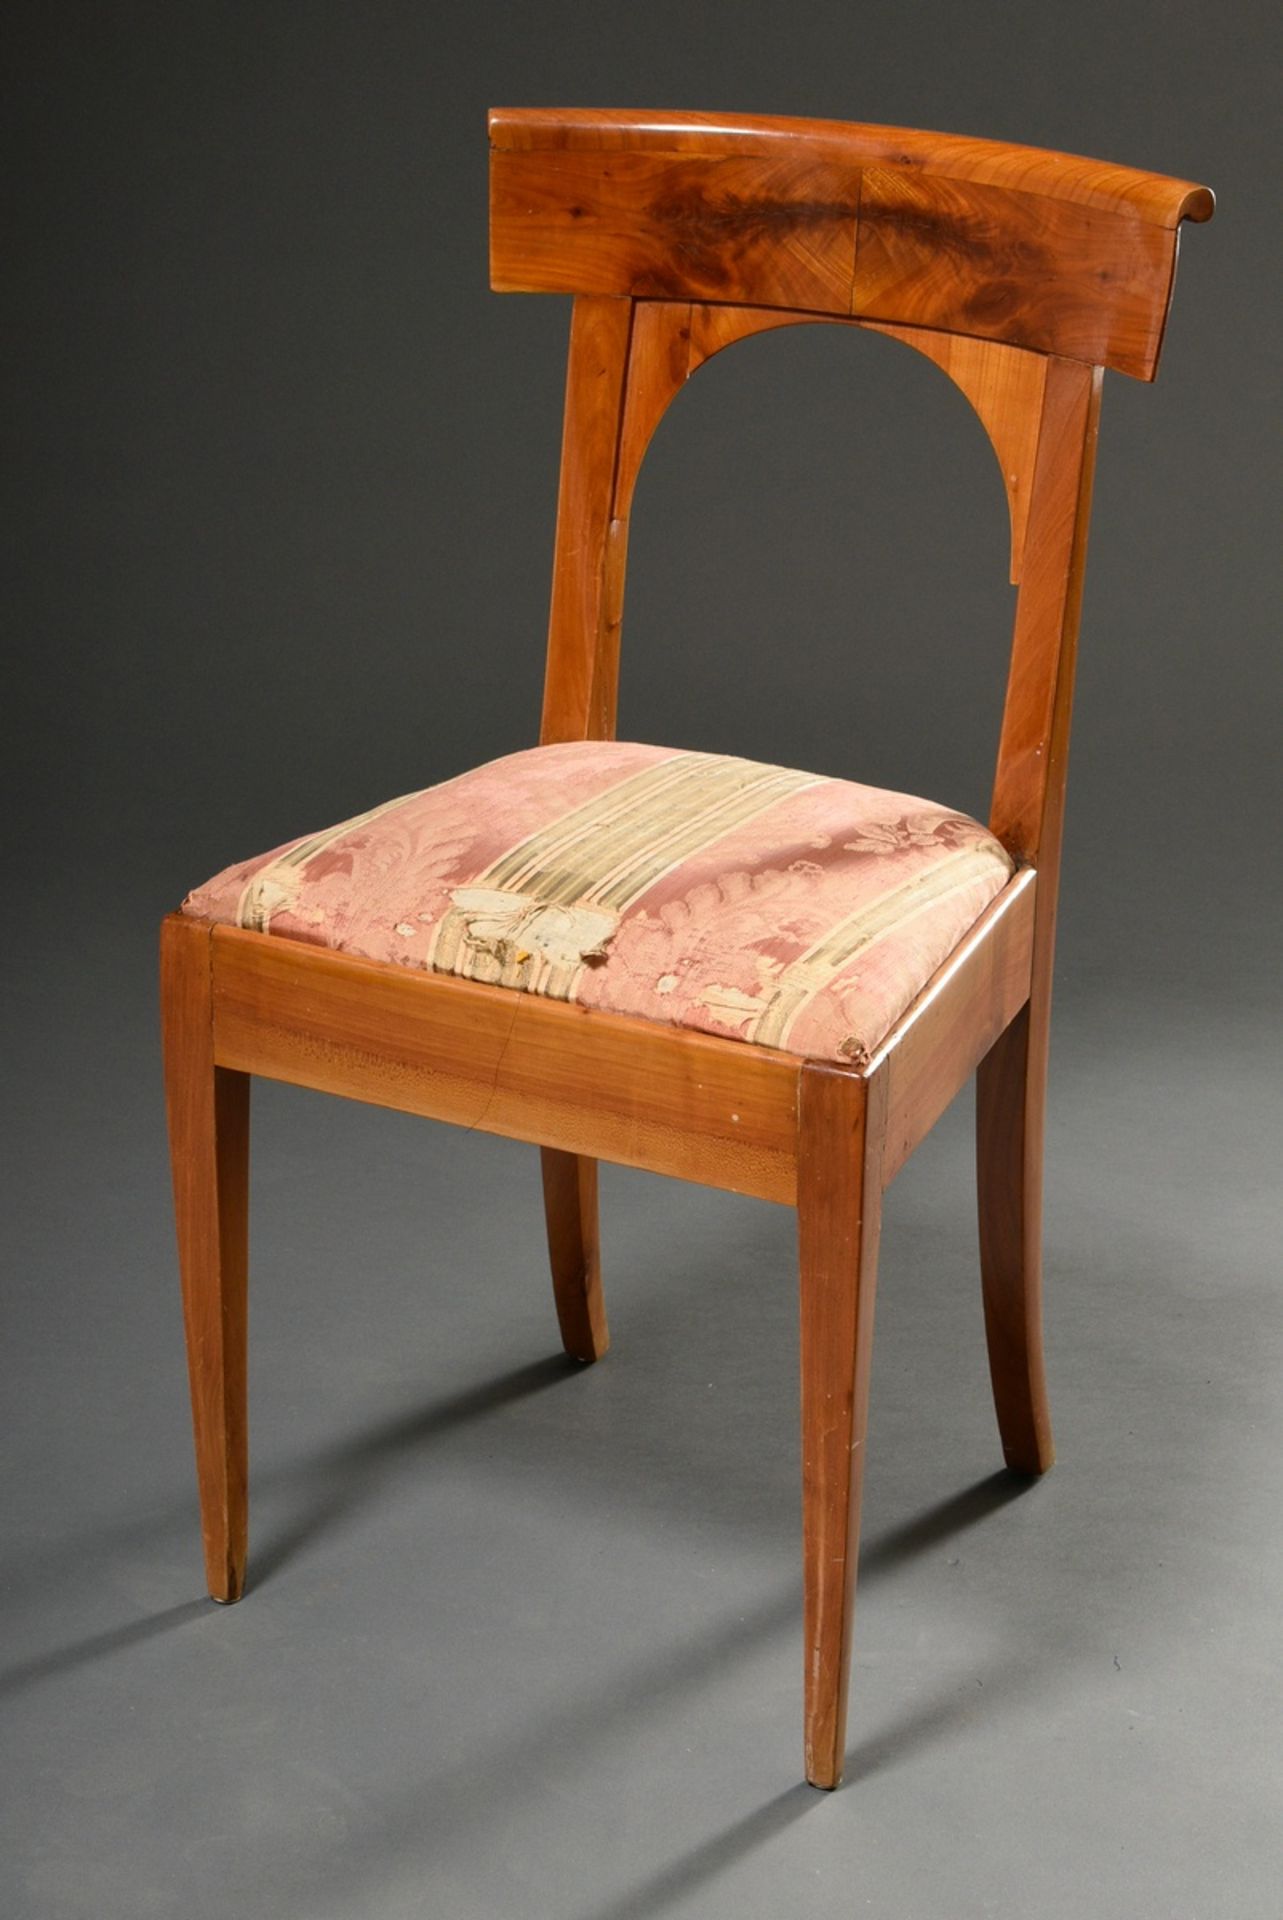 4 plain Biedermeier chairs with shovel backrest and arched element in the back, cherry veneer, 1st  - Image 6 of 8